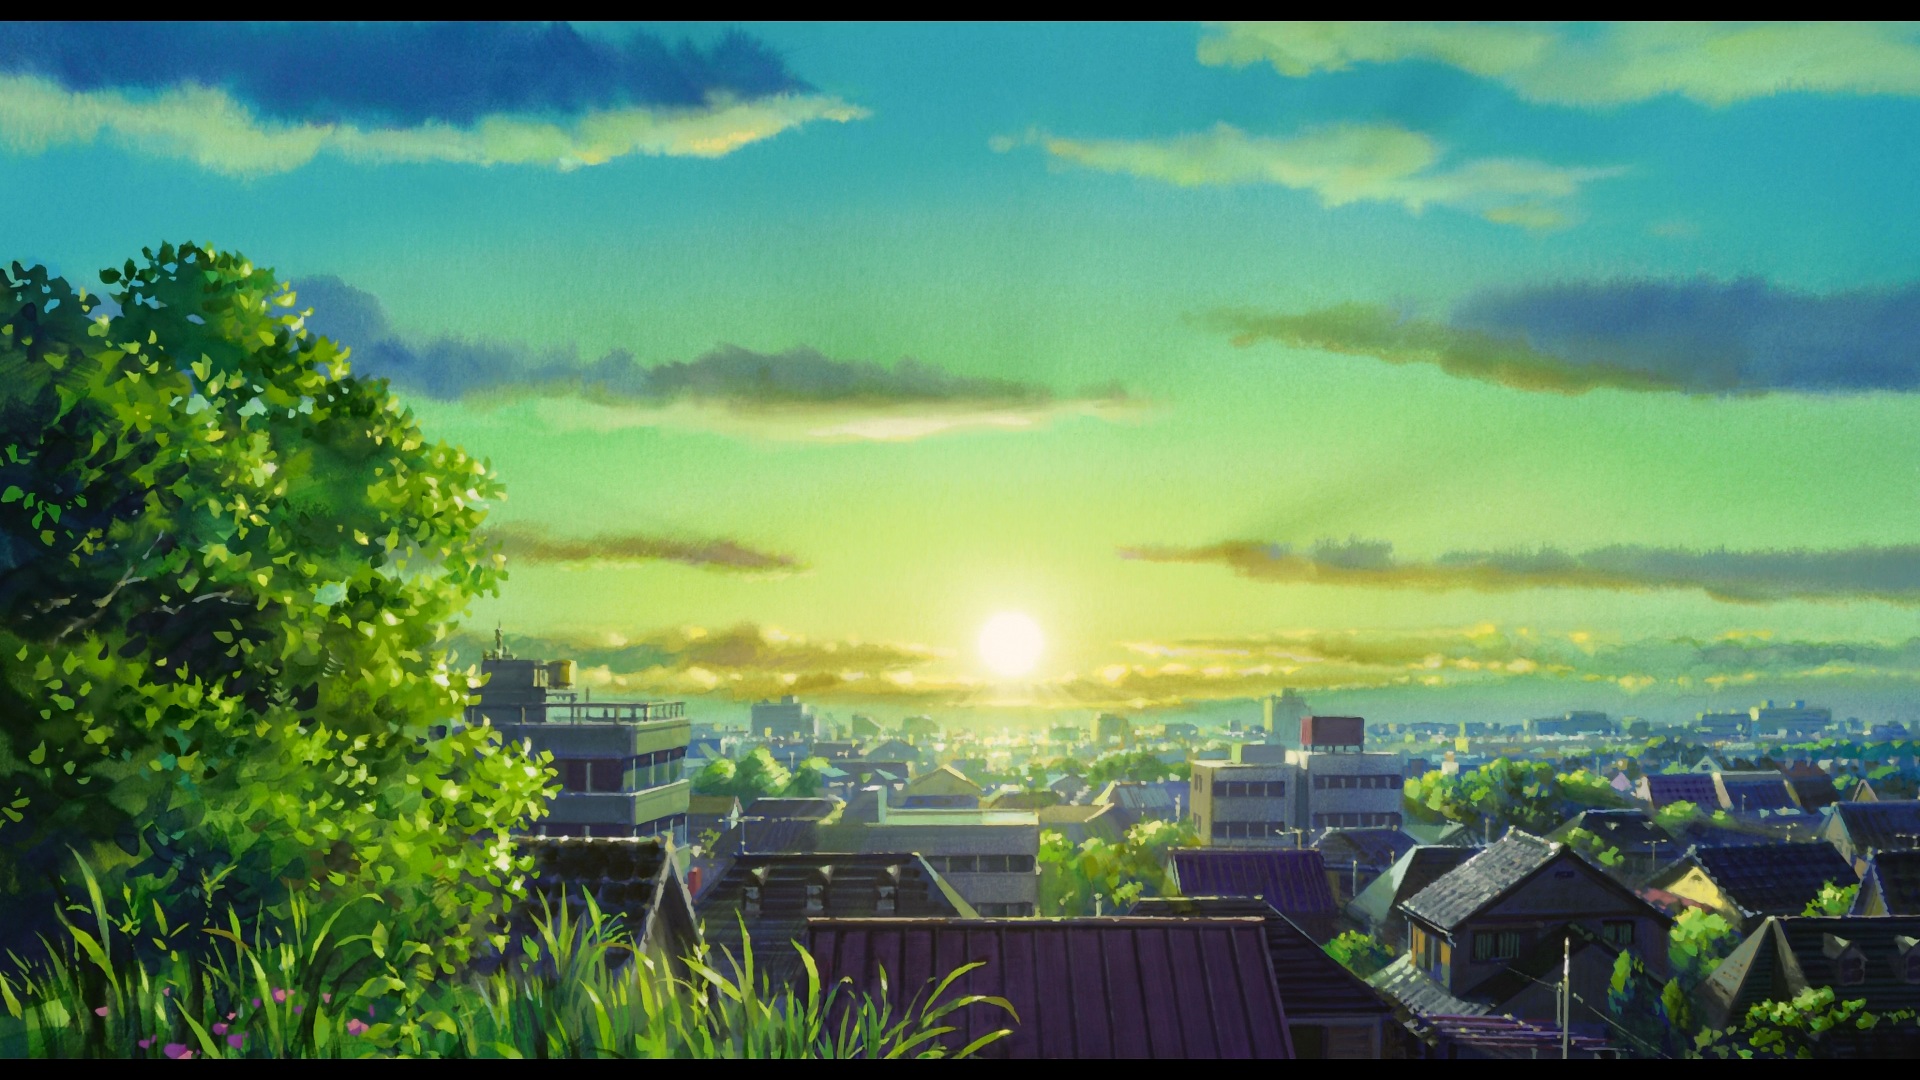 Free download 20345 anime scenery anime city sunset Wallpaper 1920x1080 Wallpaper [1920x1080] for your Desktop, Mobile & Tablet. Explore Scenery Wallpaper. Anime Scenery Wallpaper, HD Scenery Wallpaper, Natural Scenery Wallpaper